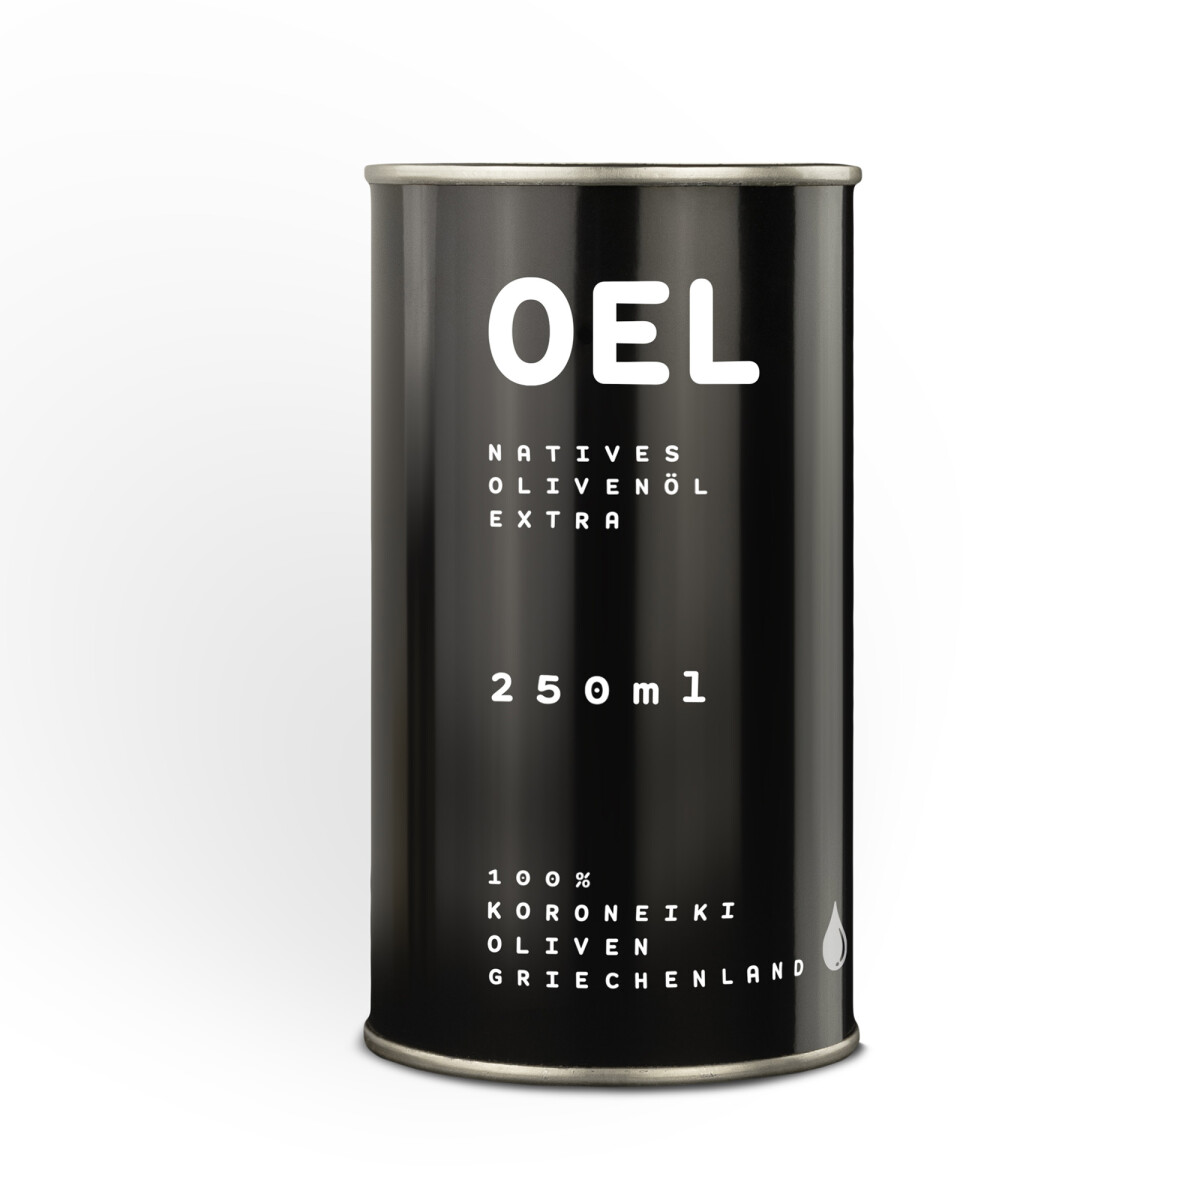 The 250 ml canister filled with extra virgin organic Coroneiki olive oil